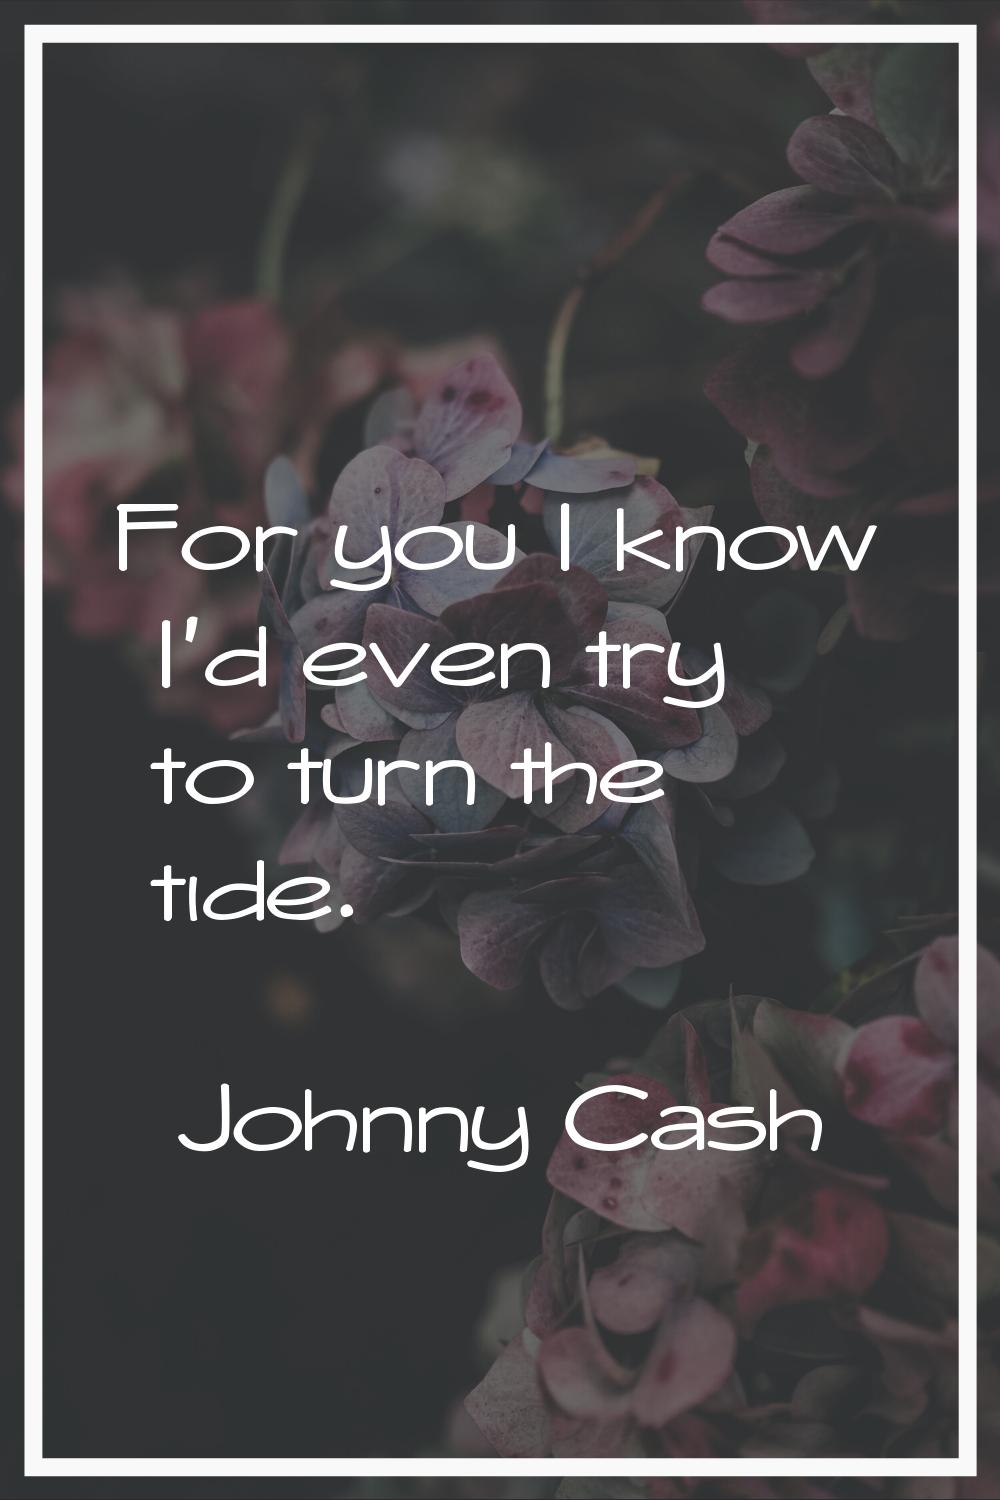 For you I know I'd even try to turn the tide.